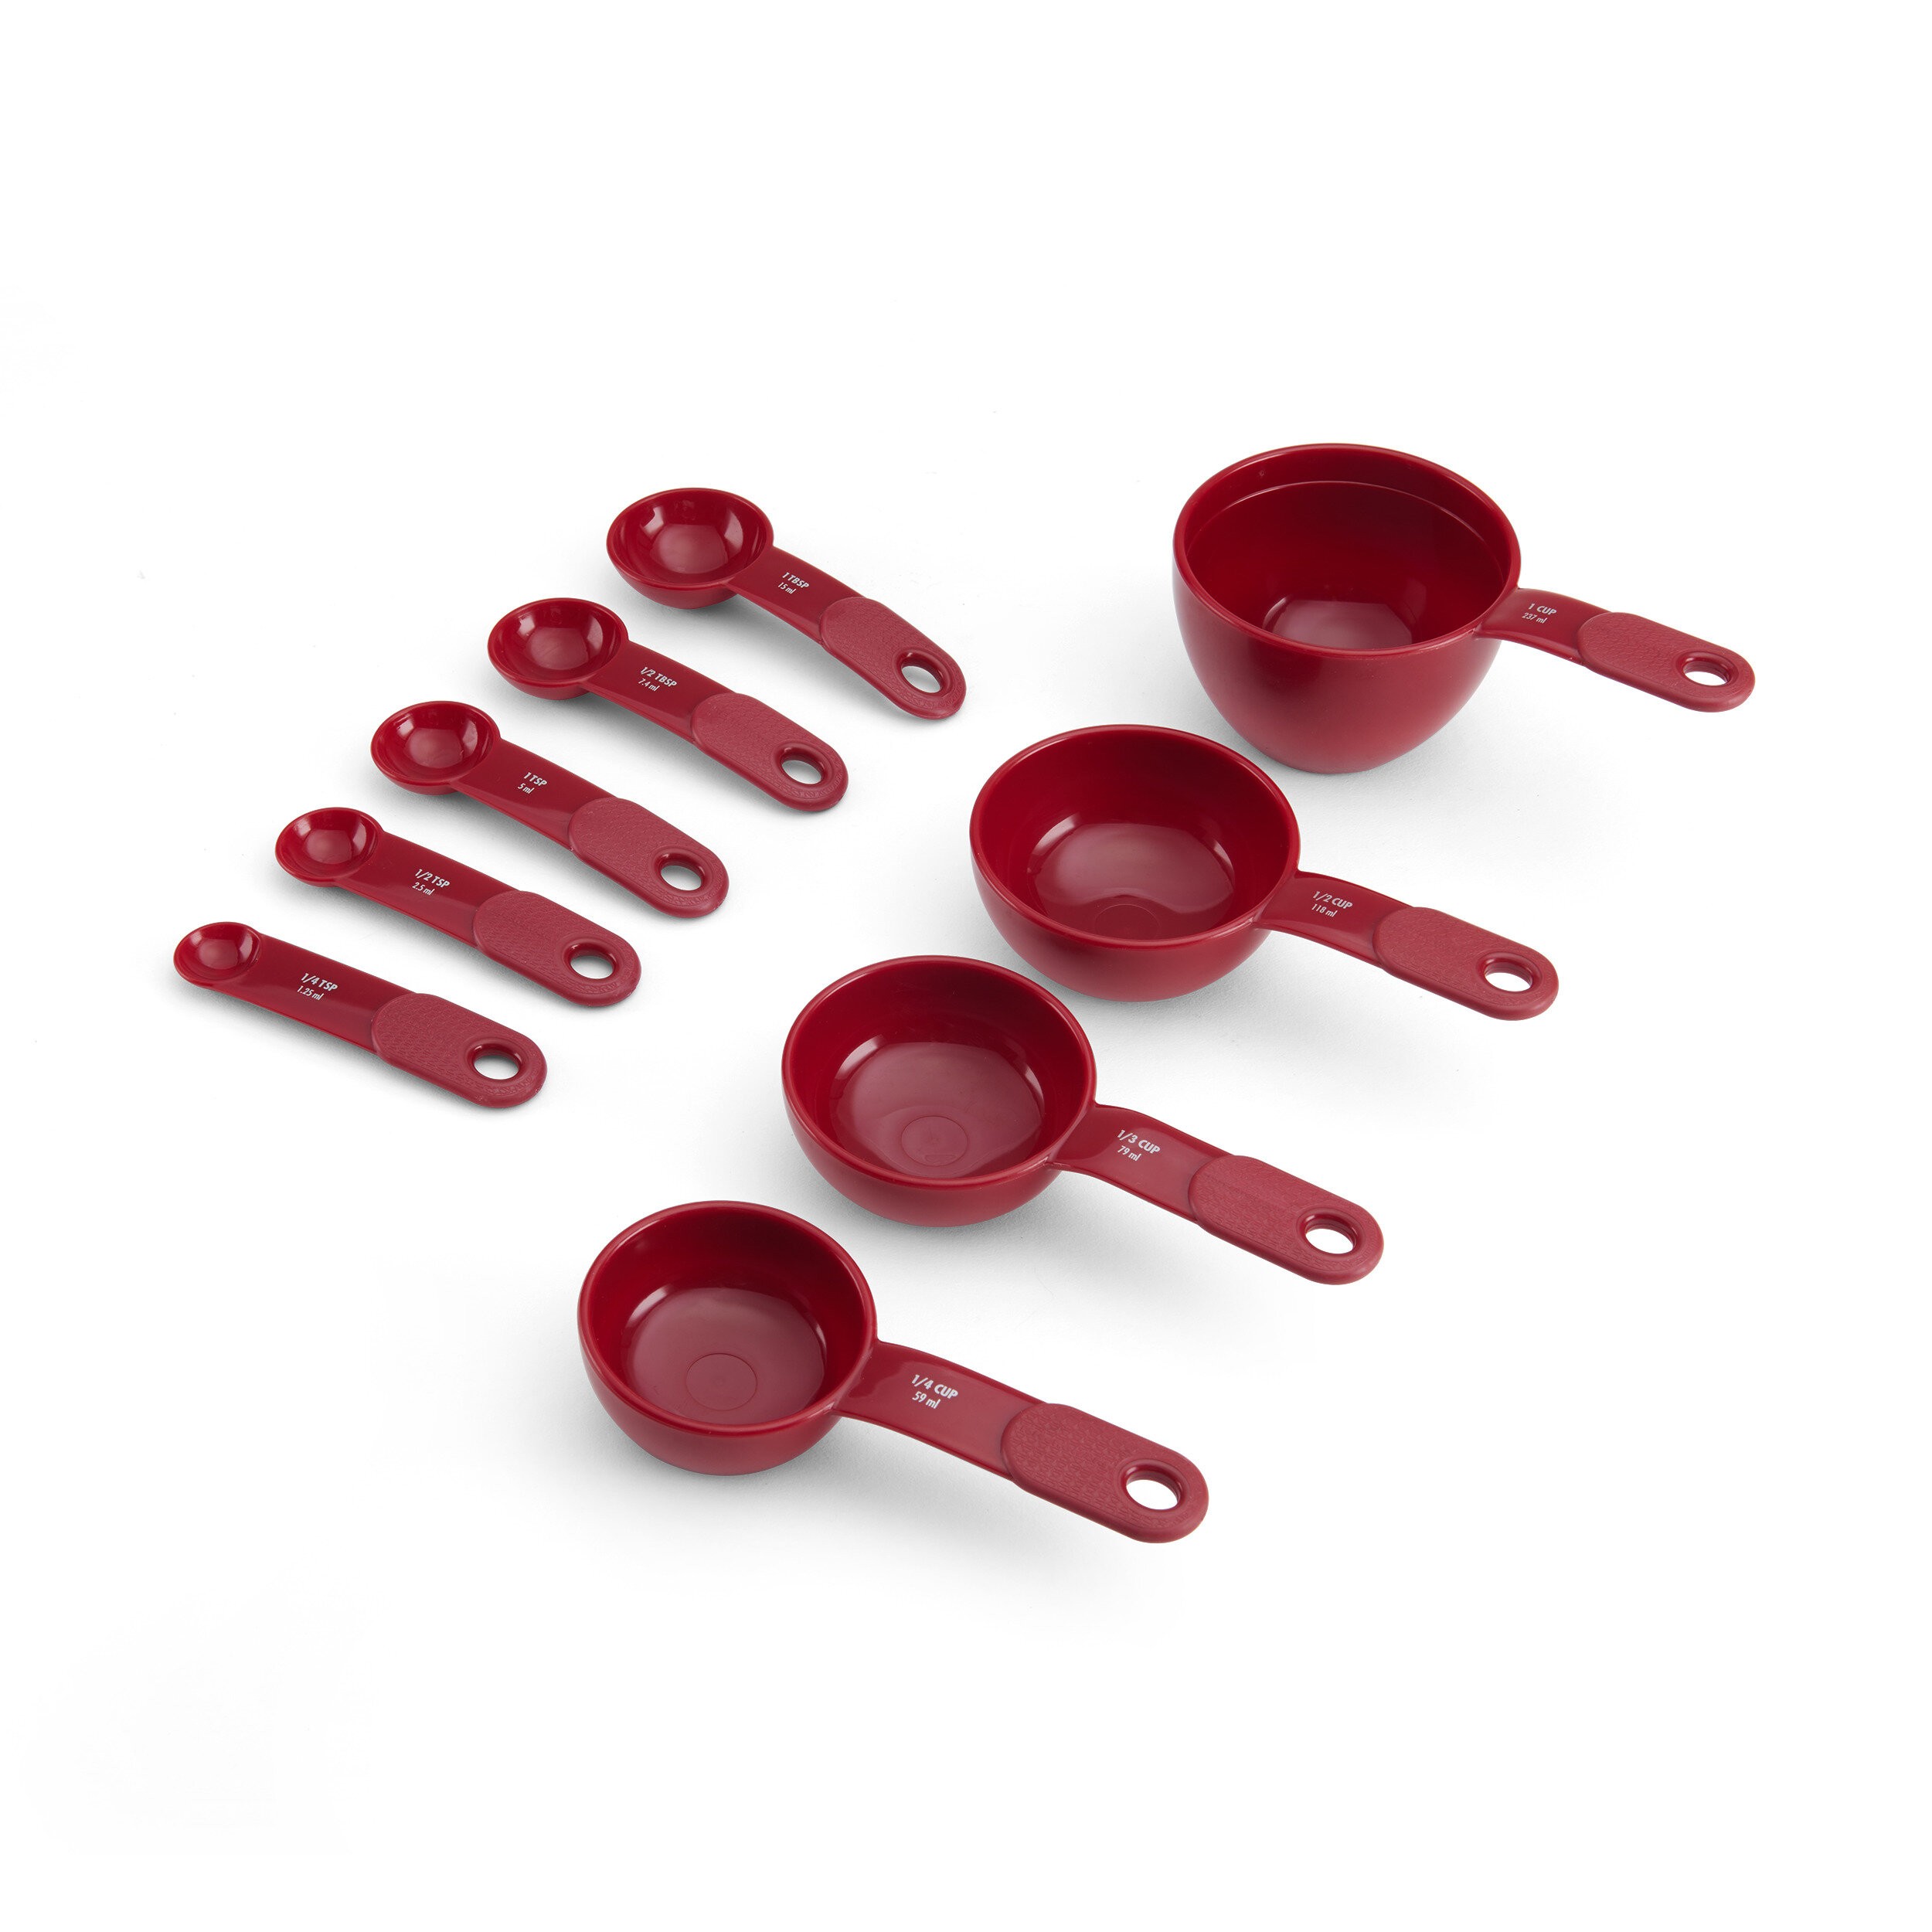 KitchenAid 9-Pieces Plastic Measuring Cup and Spoon Set